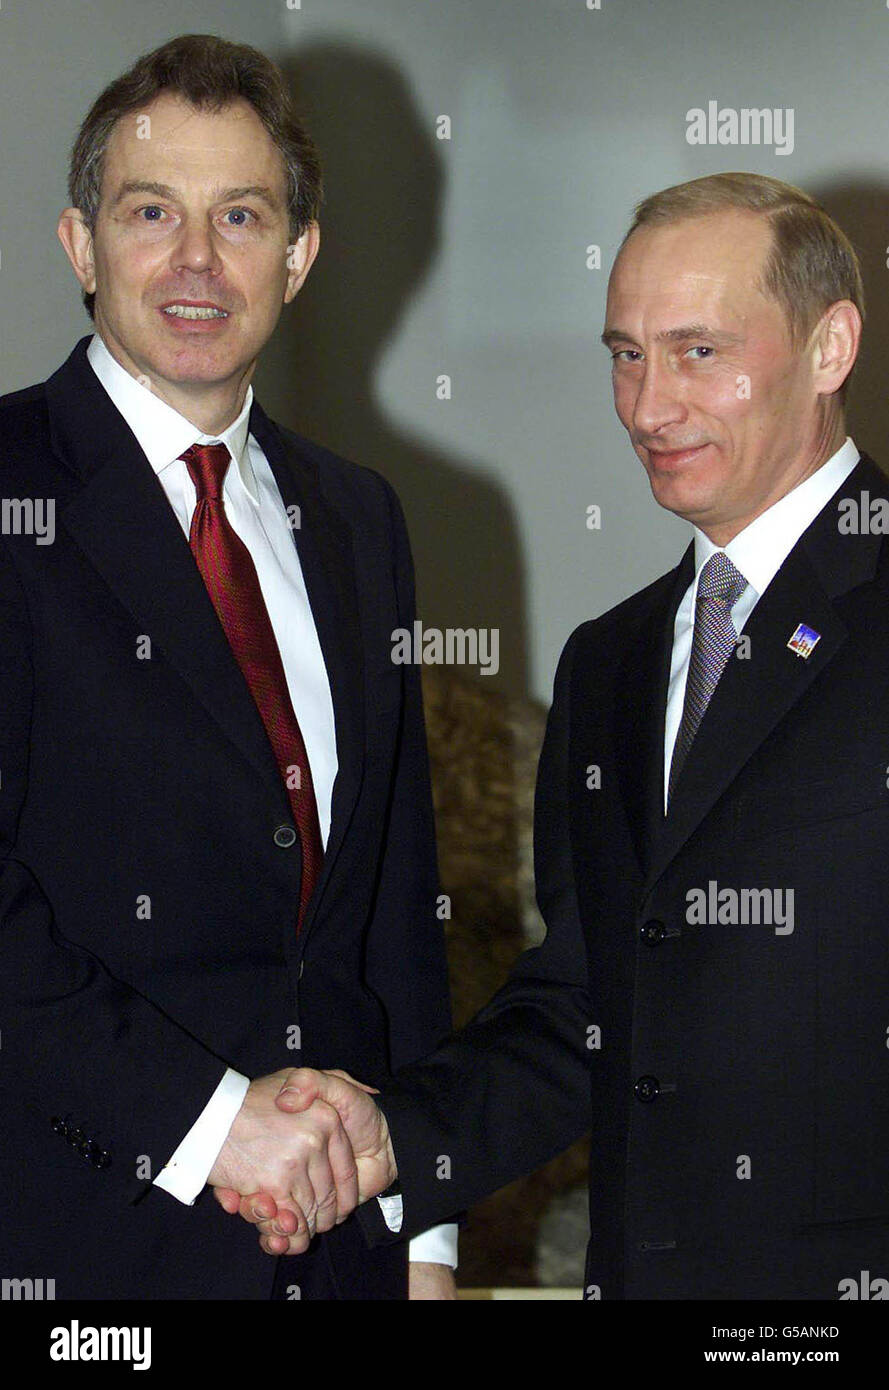 Russian President Vladimir Putin (right) shakes hands with British Prime Minister Tony Blair at the start of a bilateral meeting at the EU summit in Stockholm. Putin played down the diplomatic crisis with the U.S when pressed by journalists covering the summit. * The summit, hosted by Sweden who presently hold the 6-month rotating presidency, will focus on economic and social problems in Europe. Stock Photo